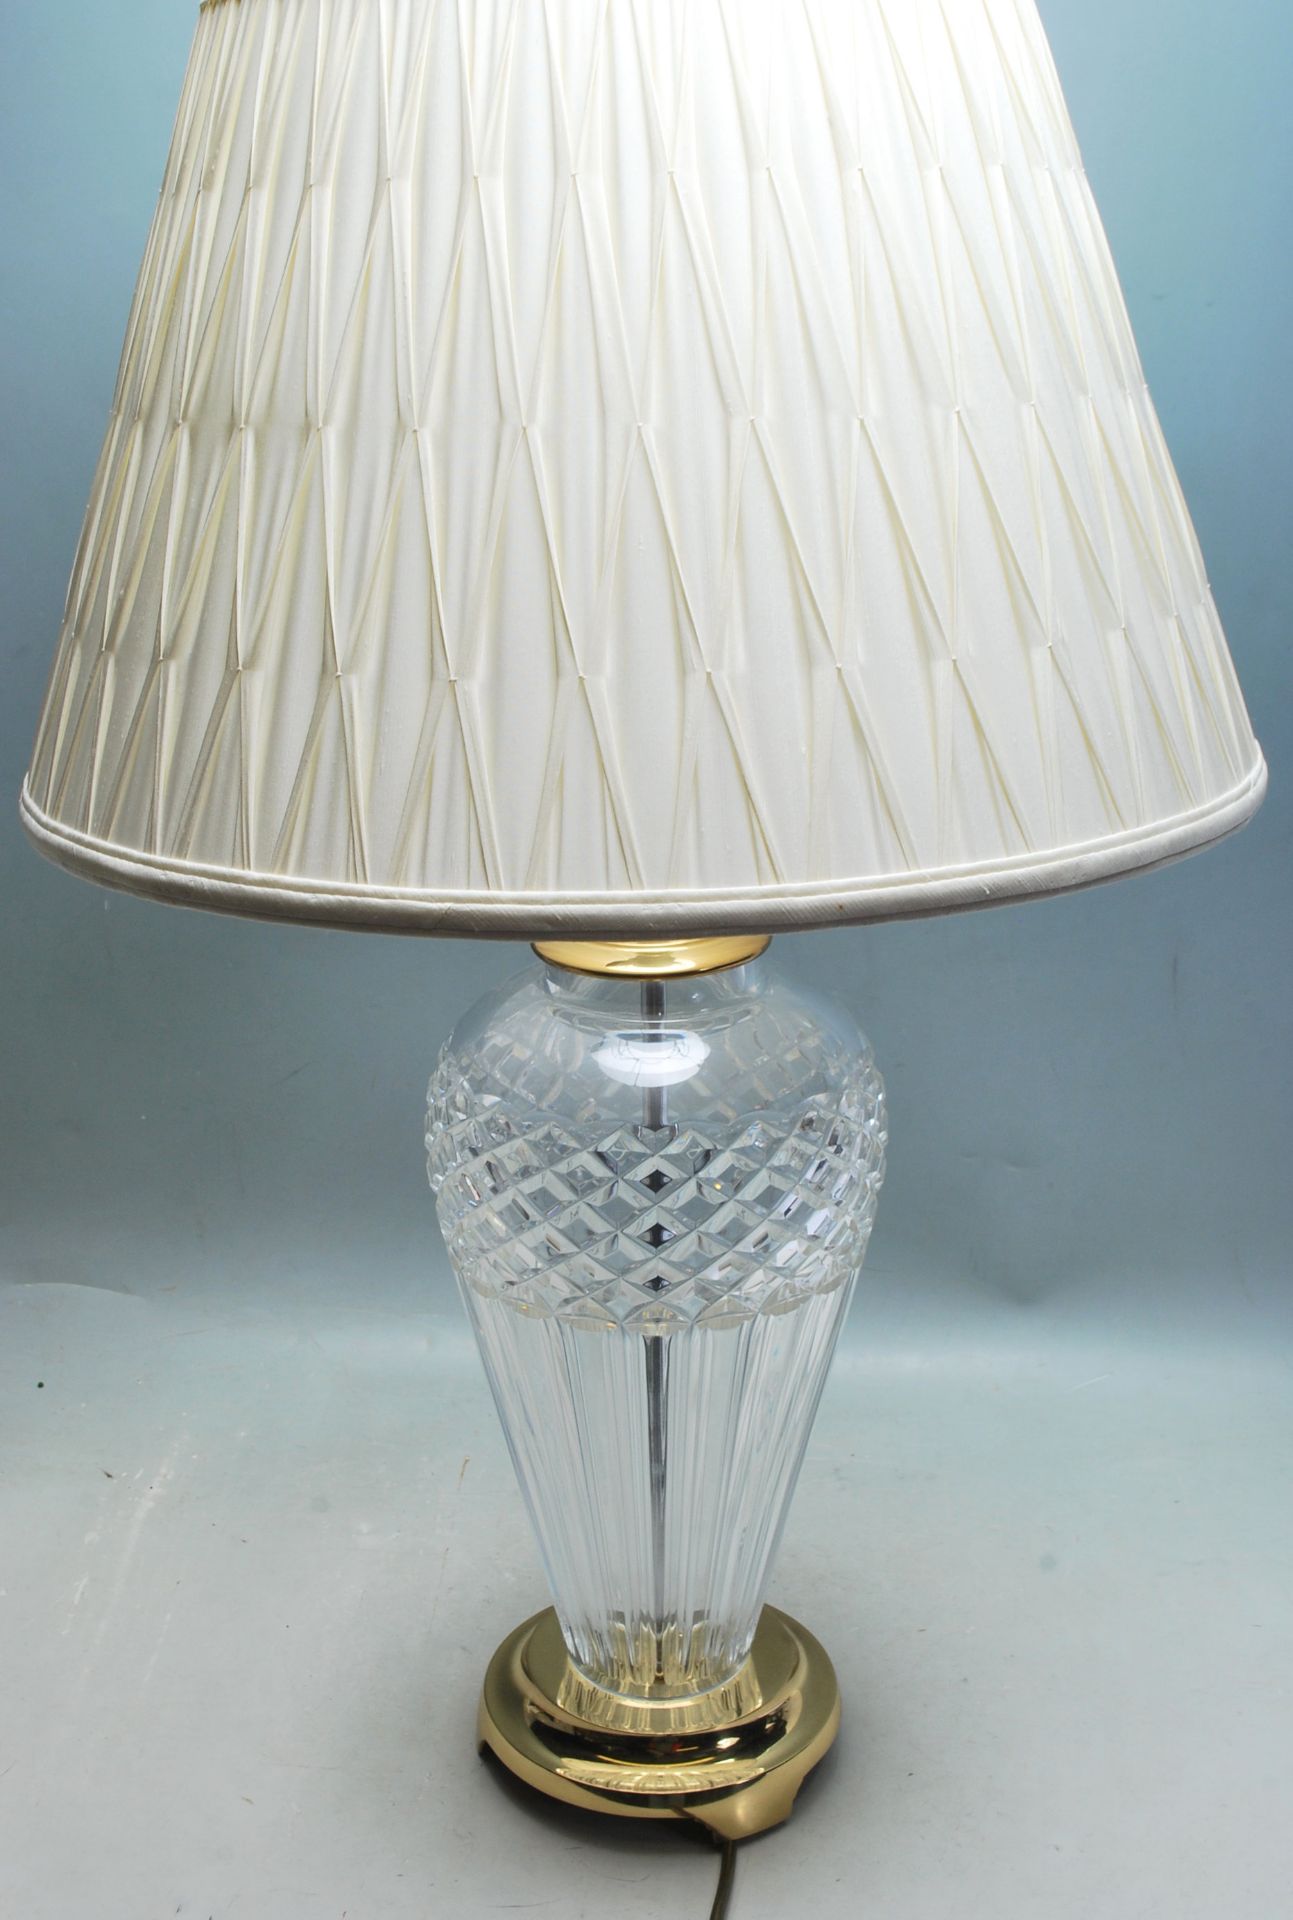 WATERFORD CRYSTAL BELLINE TABLE LAMP WITH SHADE - BOXED